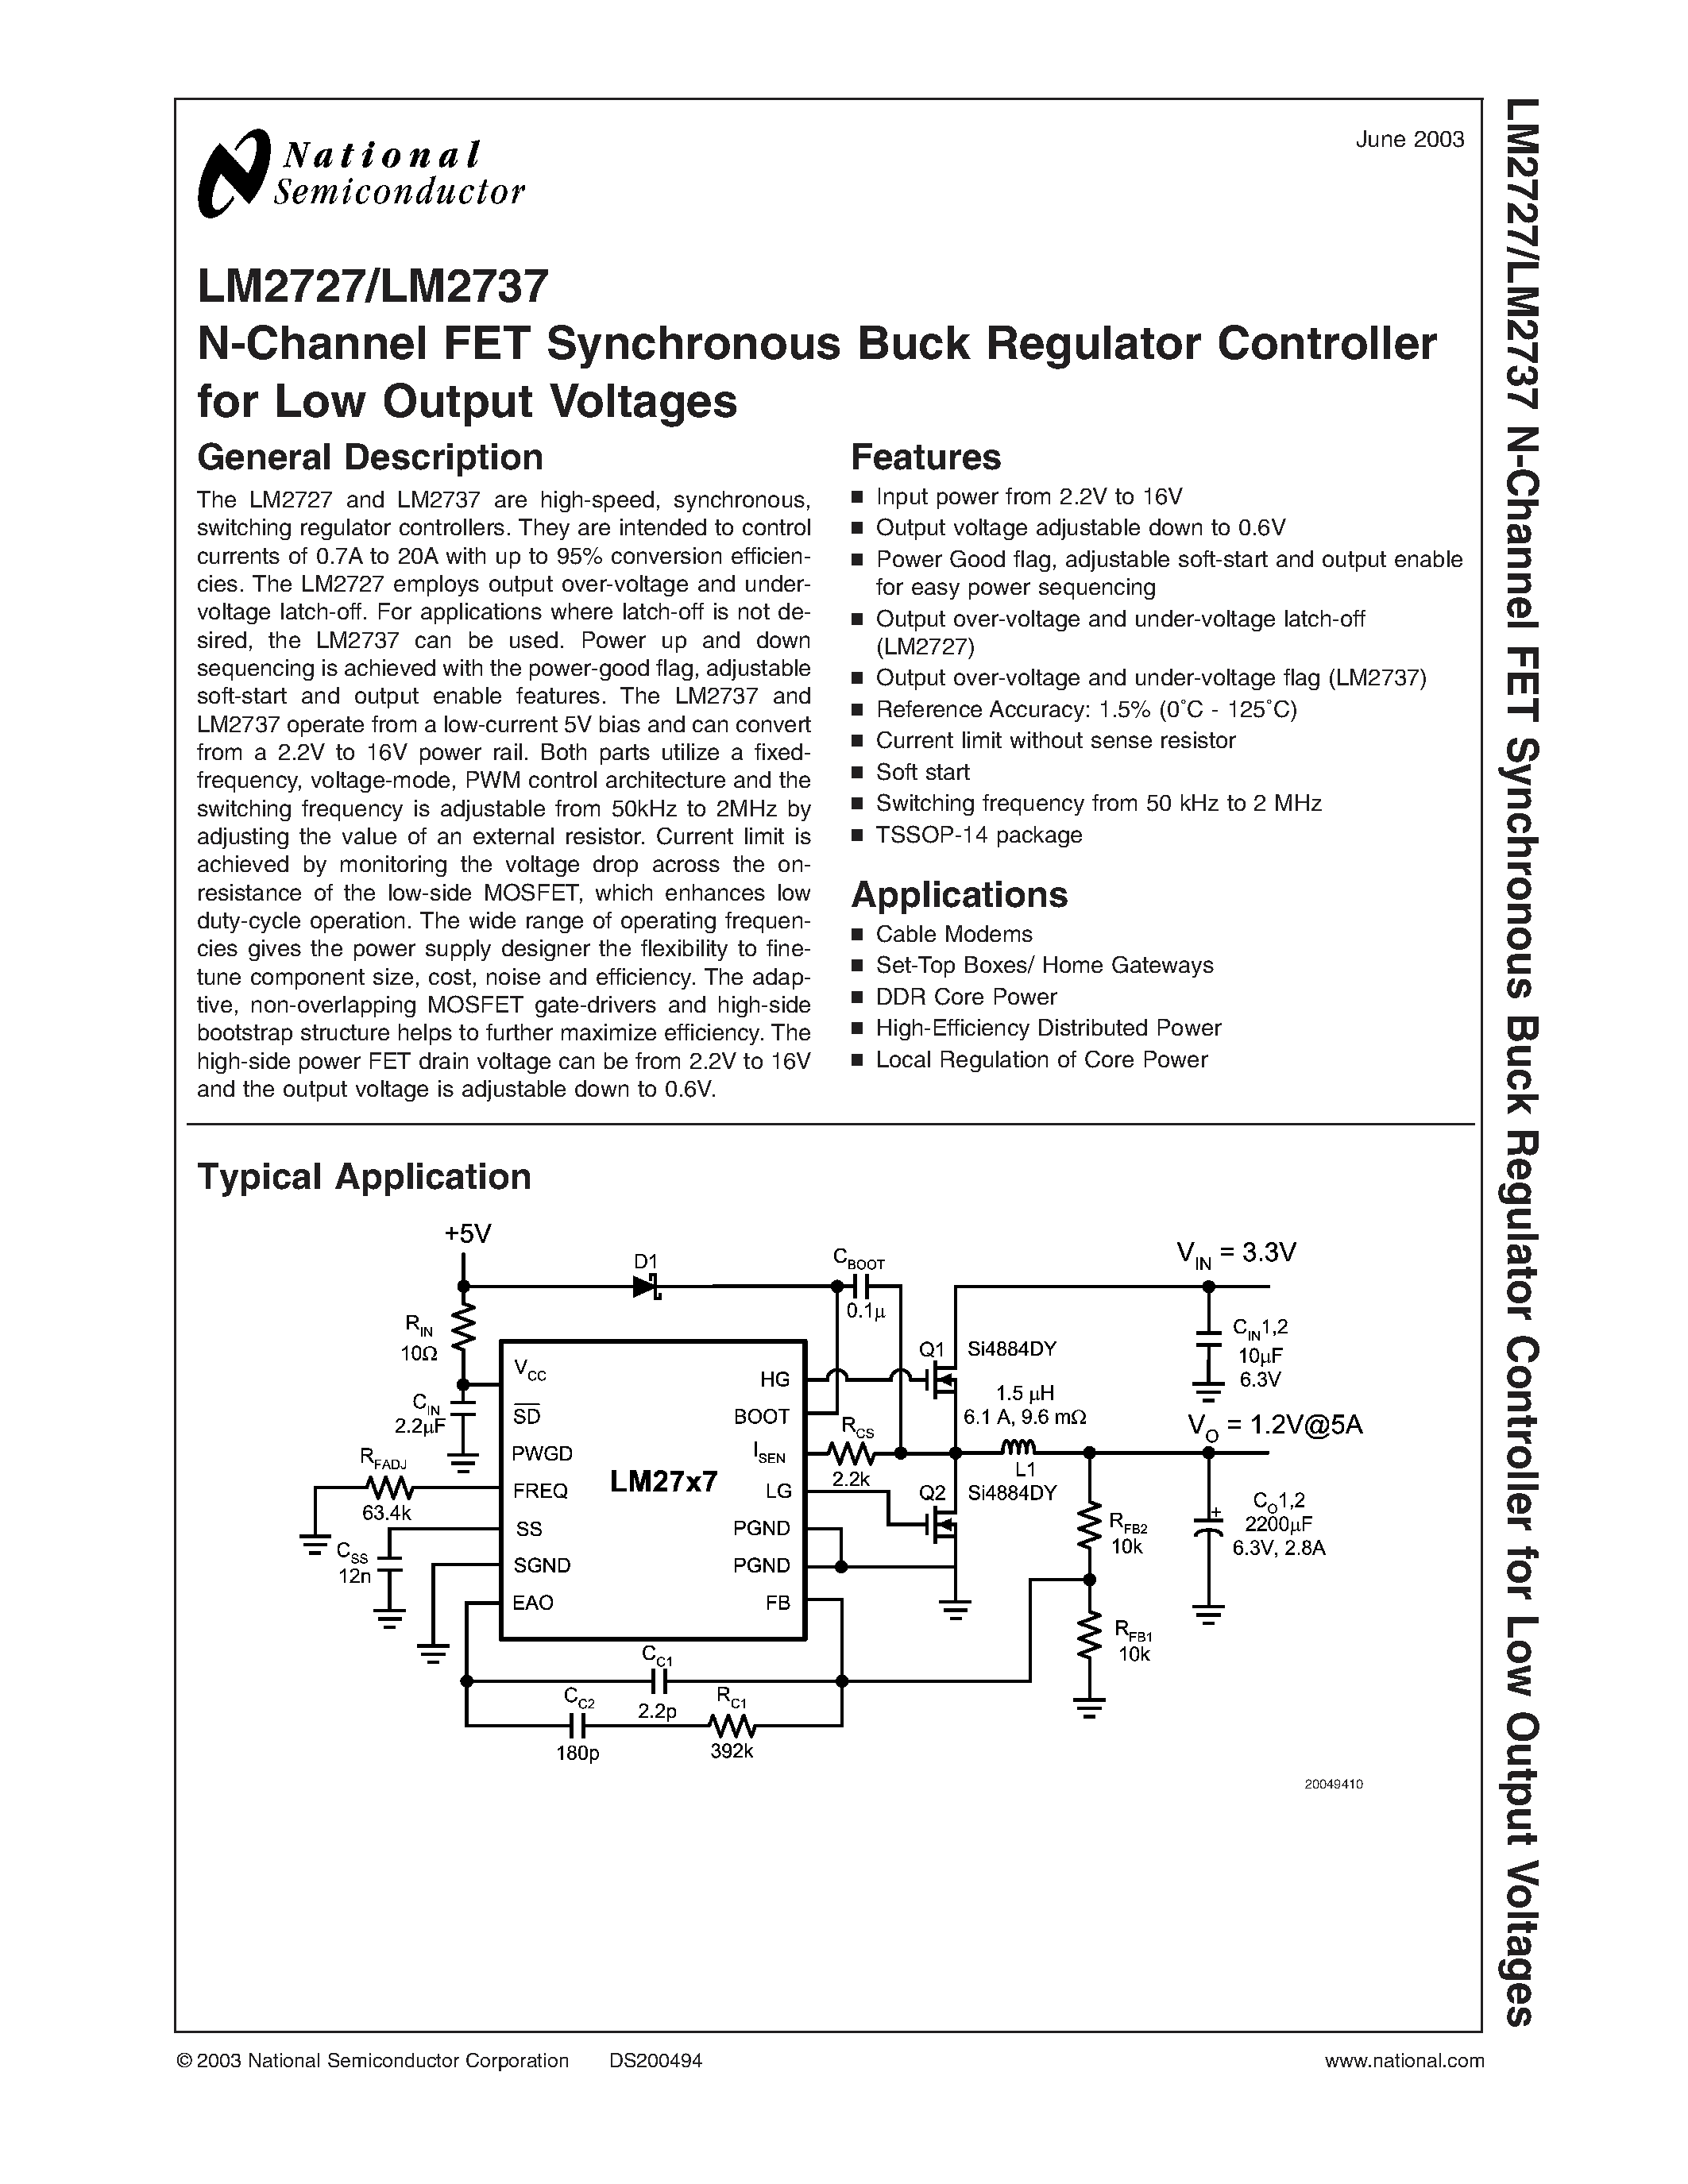 Даташит BAT-54 - N-Channel FET Synchronous Buck Regulator Controller for Low Output Voltages страница 1